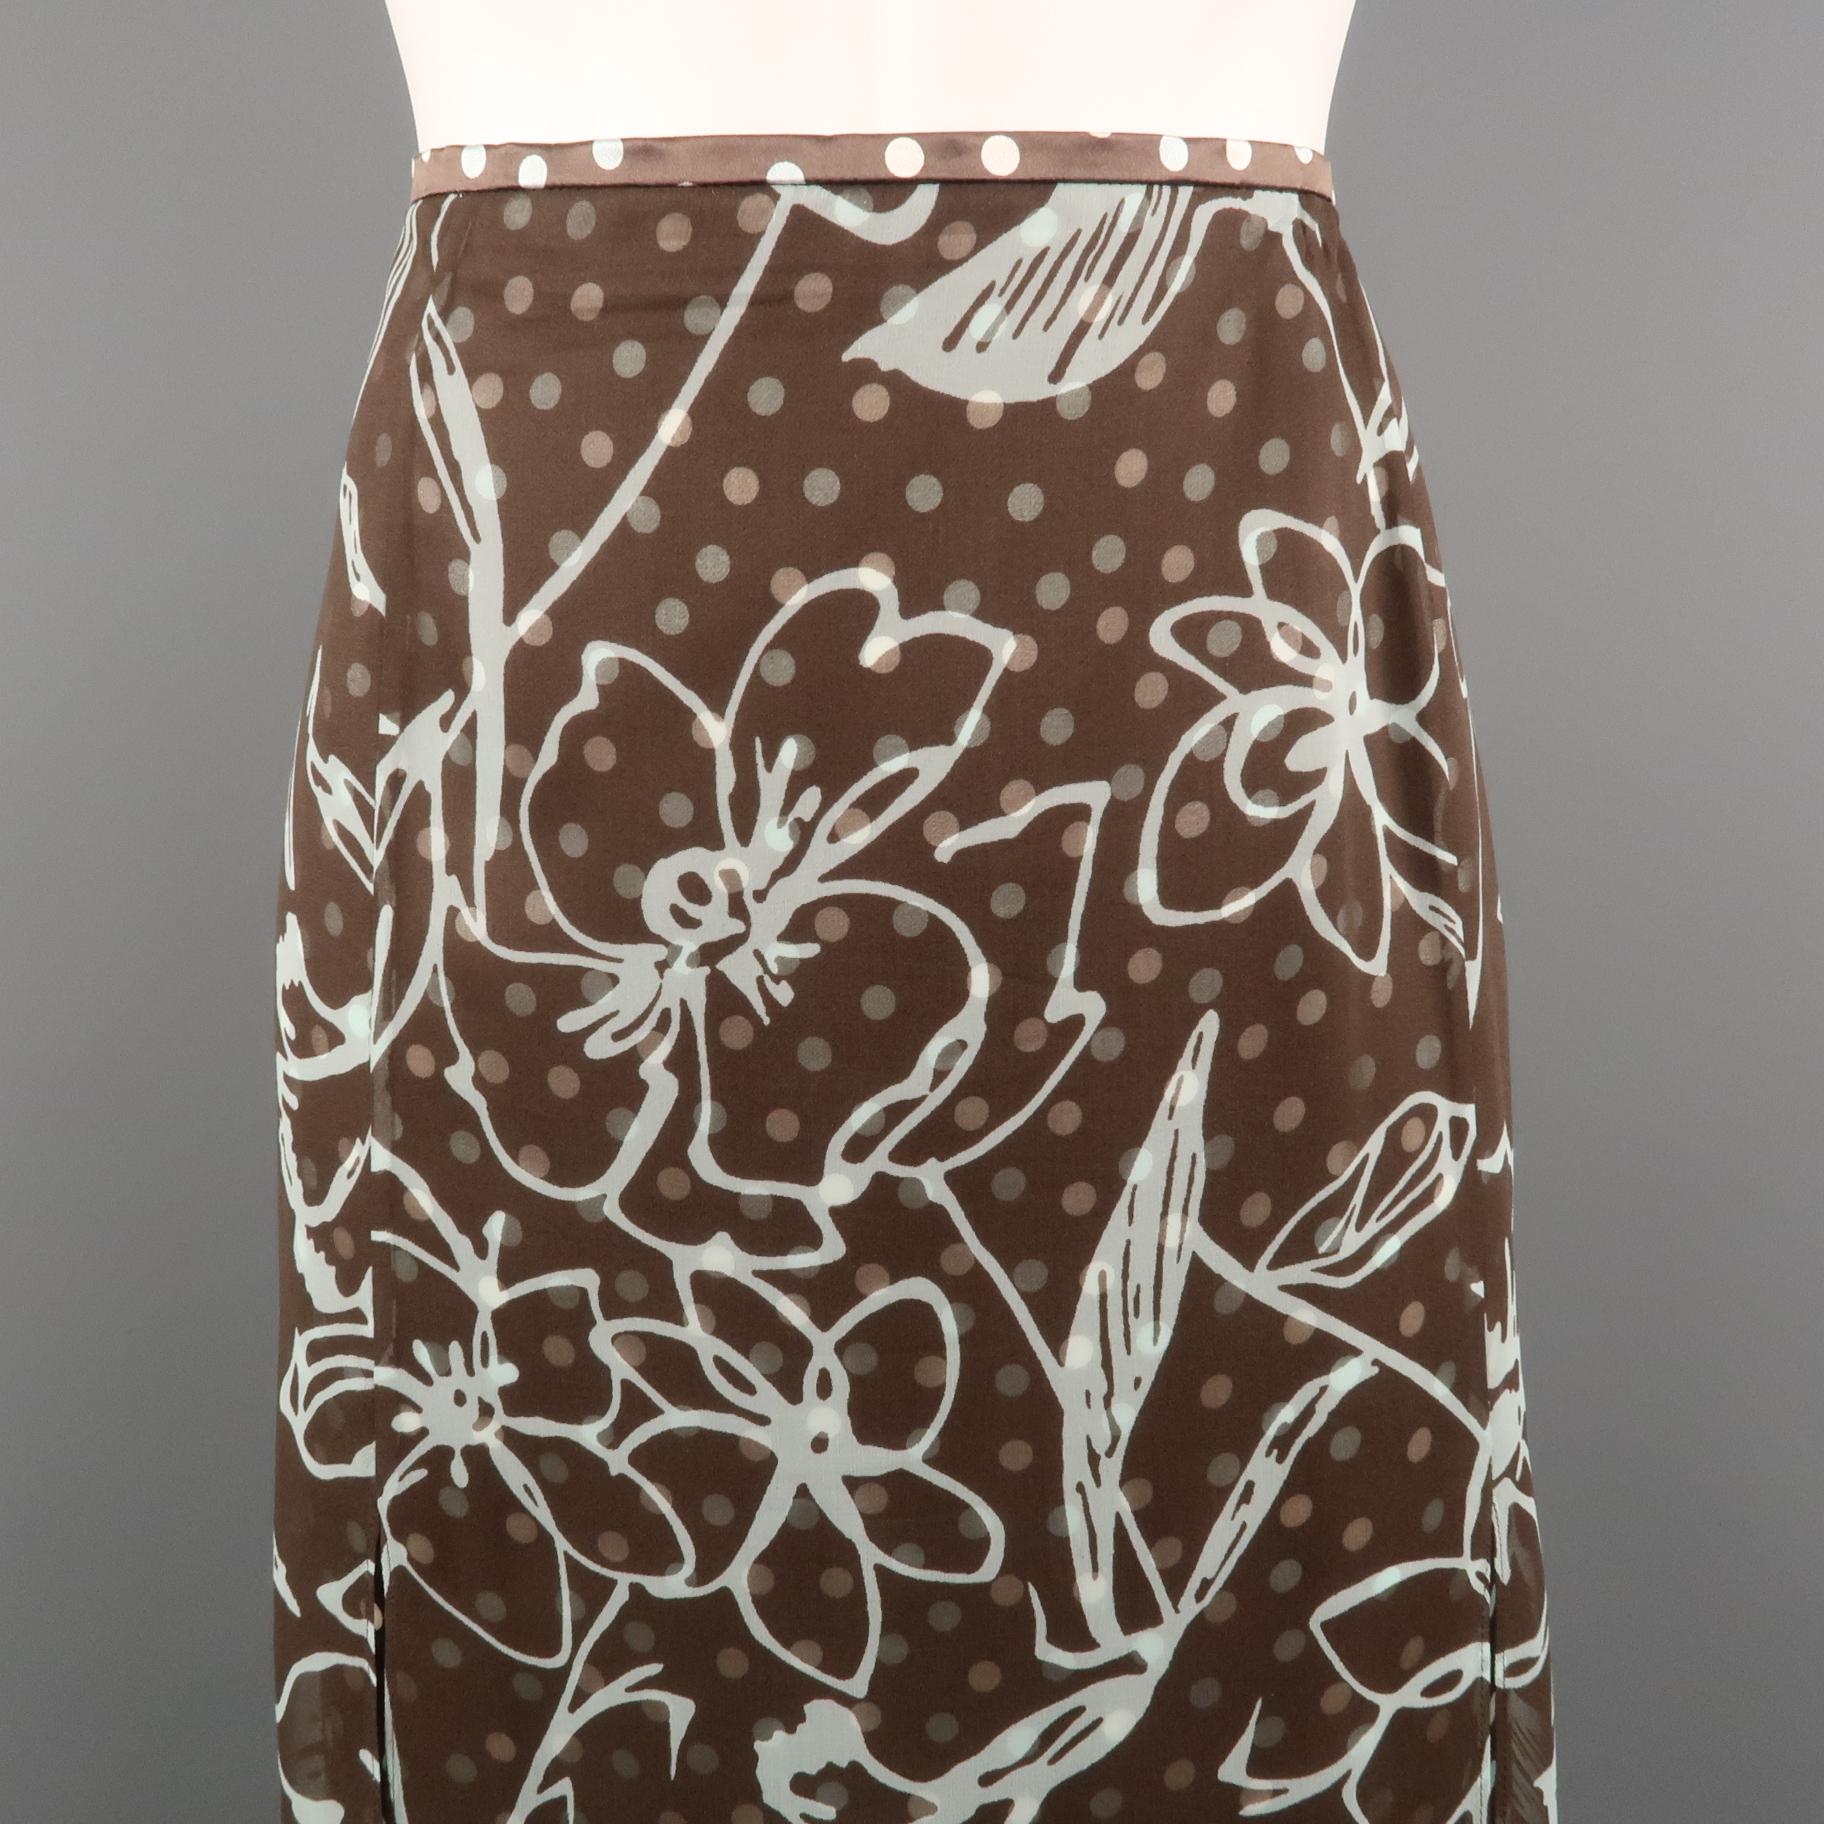 ESCADA skirt comes in brown and teal polka dot print silk with a floral print chiffon overlay, satin waistband, and dual slits. Made in Germany.
 
Excellent Pre-Owned Condition.
Marked: IT 46
 
Measurements:
 
Waist: 36 in.
Hip: 46 in.
Length: 27 in.